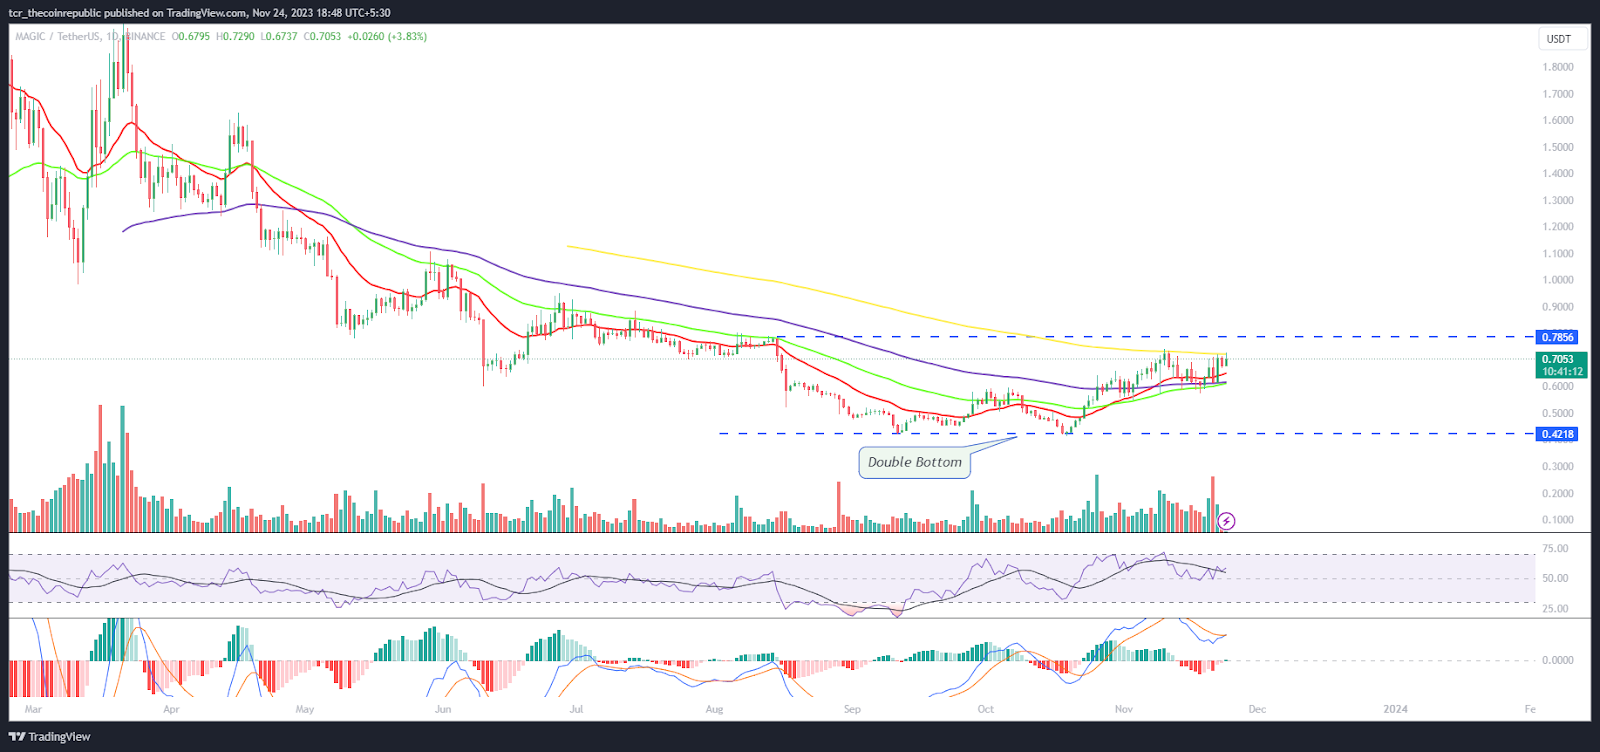 MAGIC Token Recovered Gains Close To Breakout Zone of $0.7500